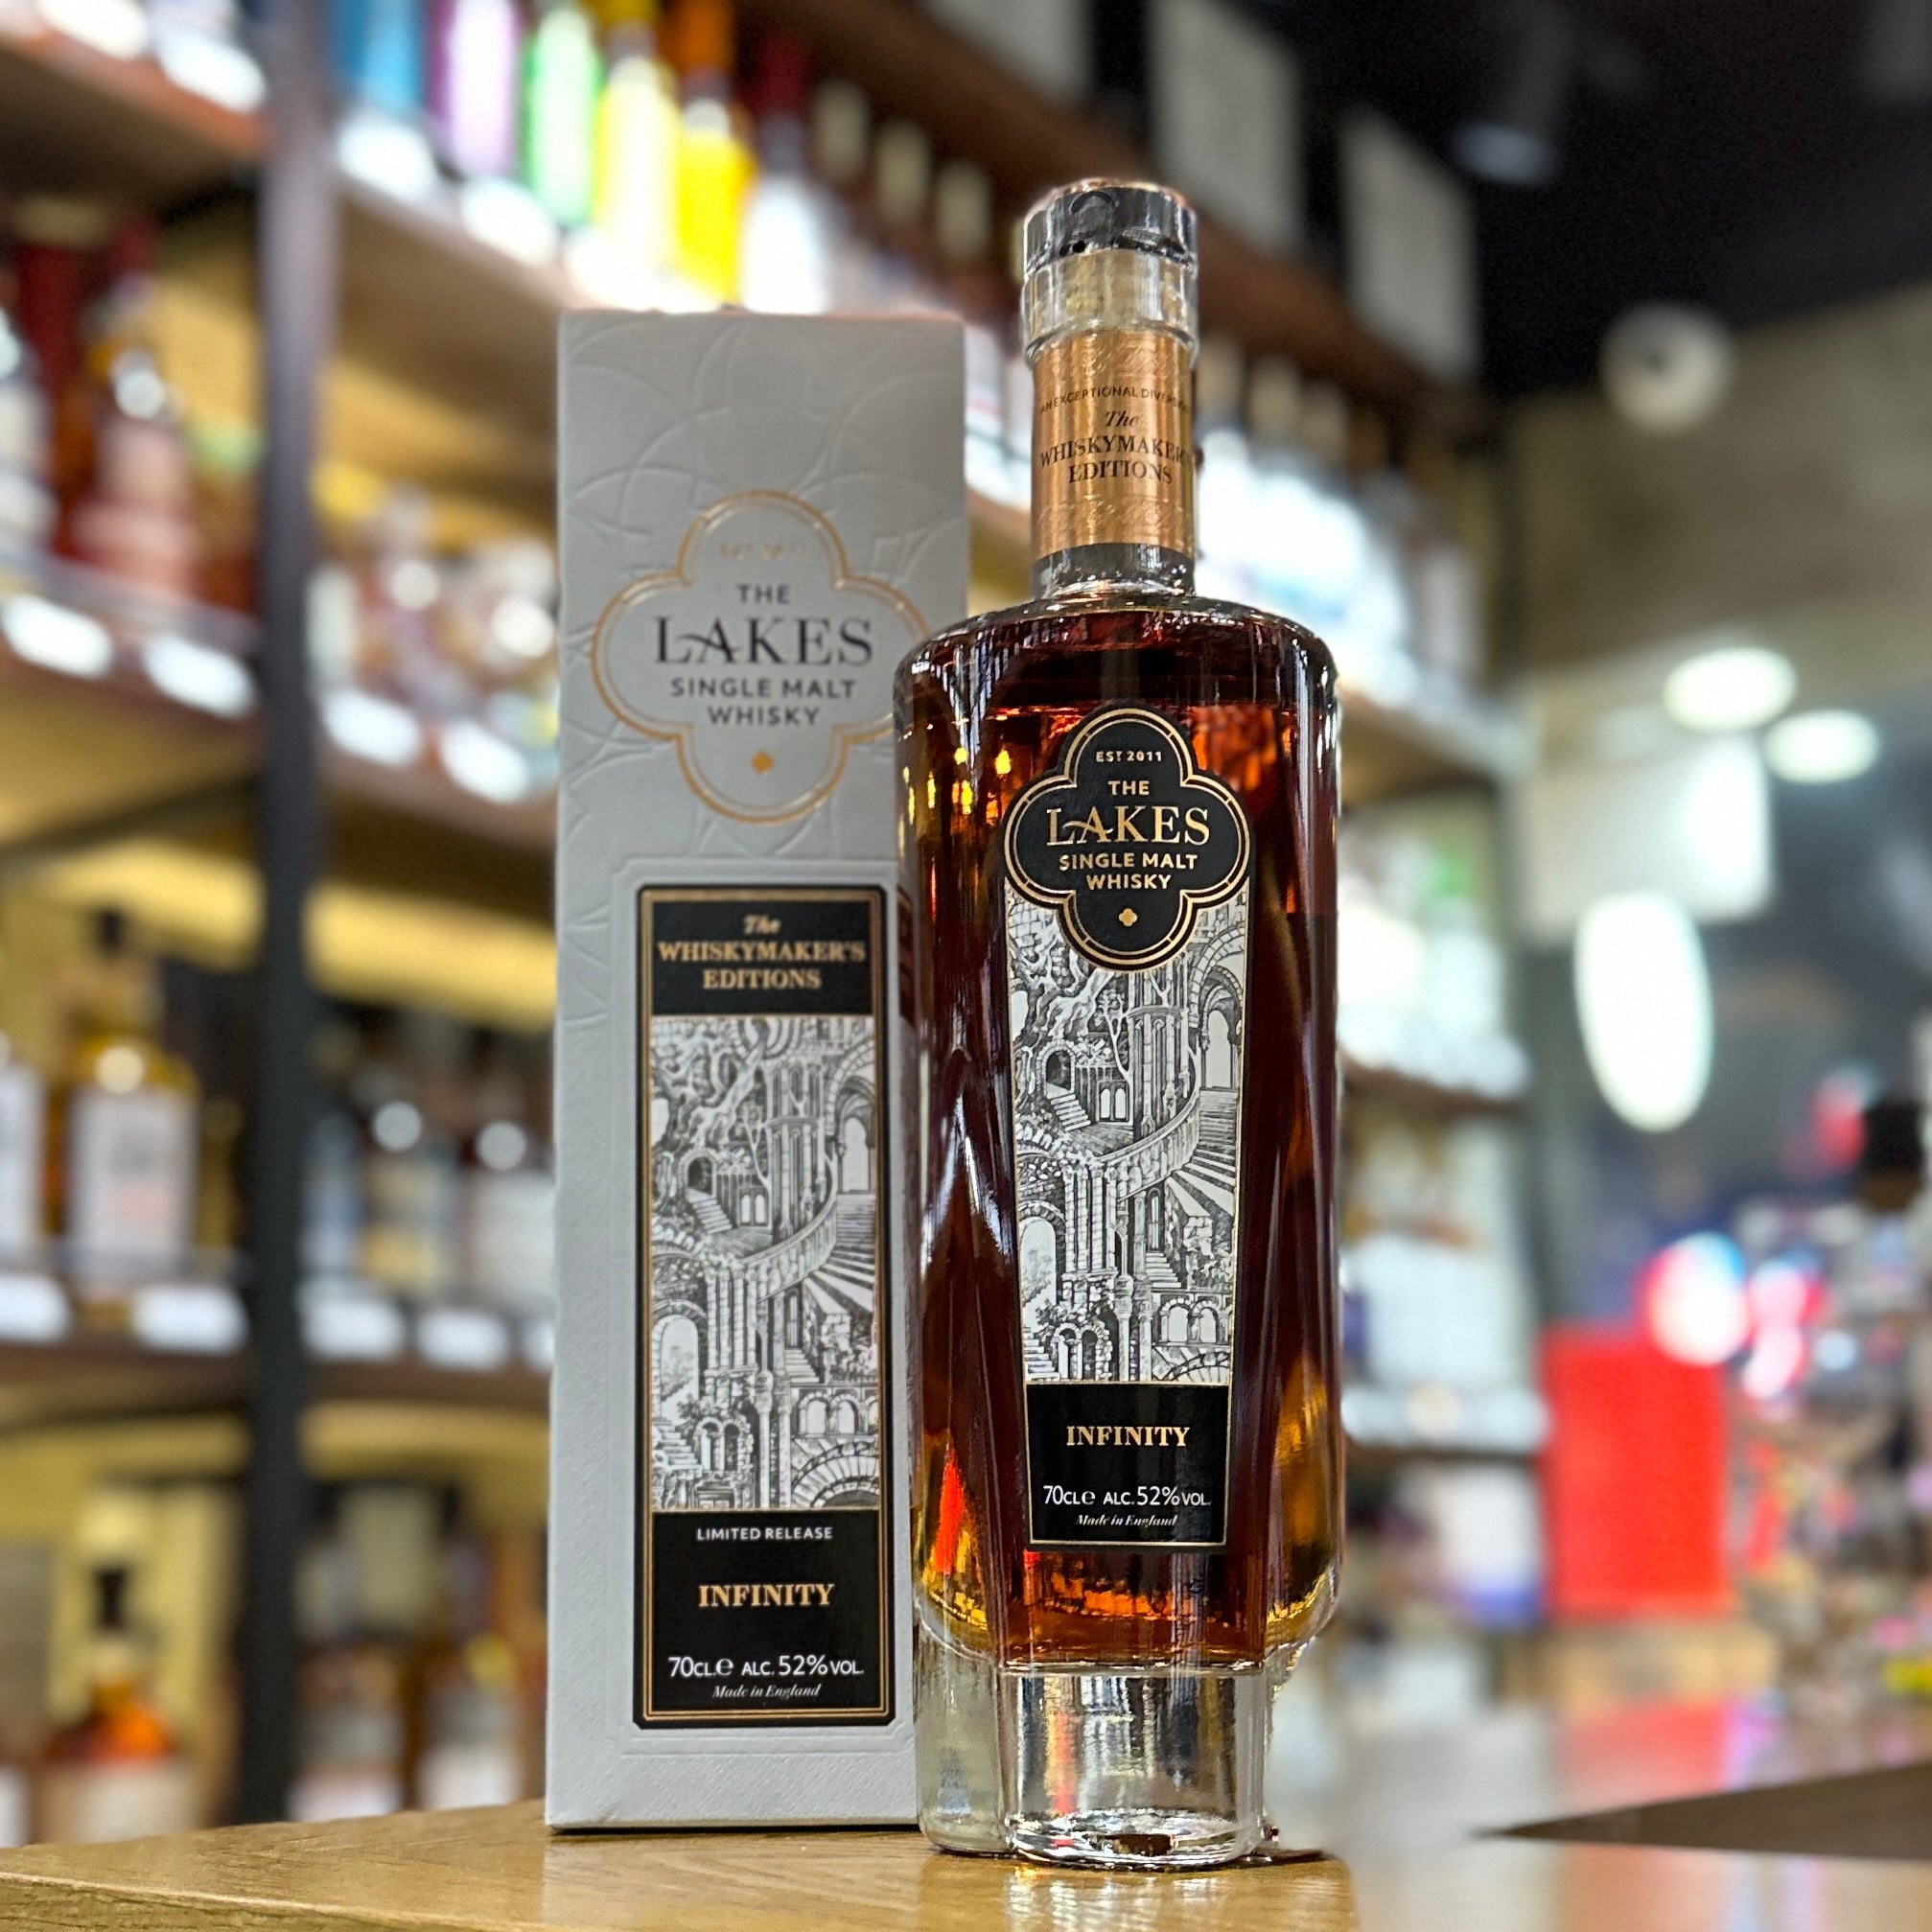 The Lakes Whiskymaker's Edition Infinity Single Malt Whisky